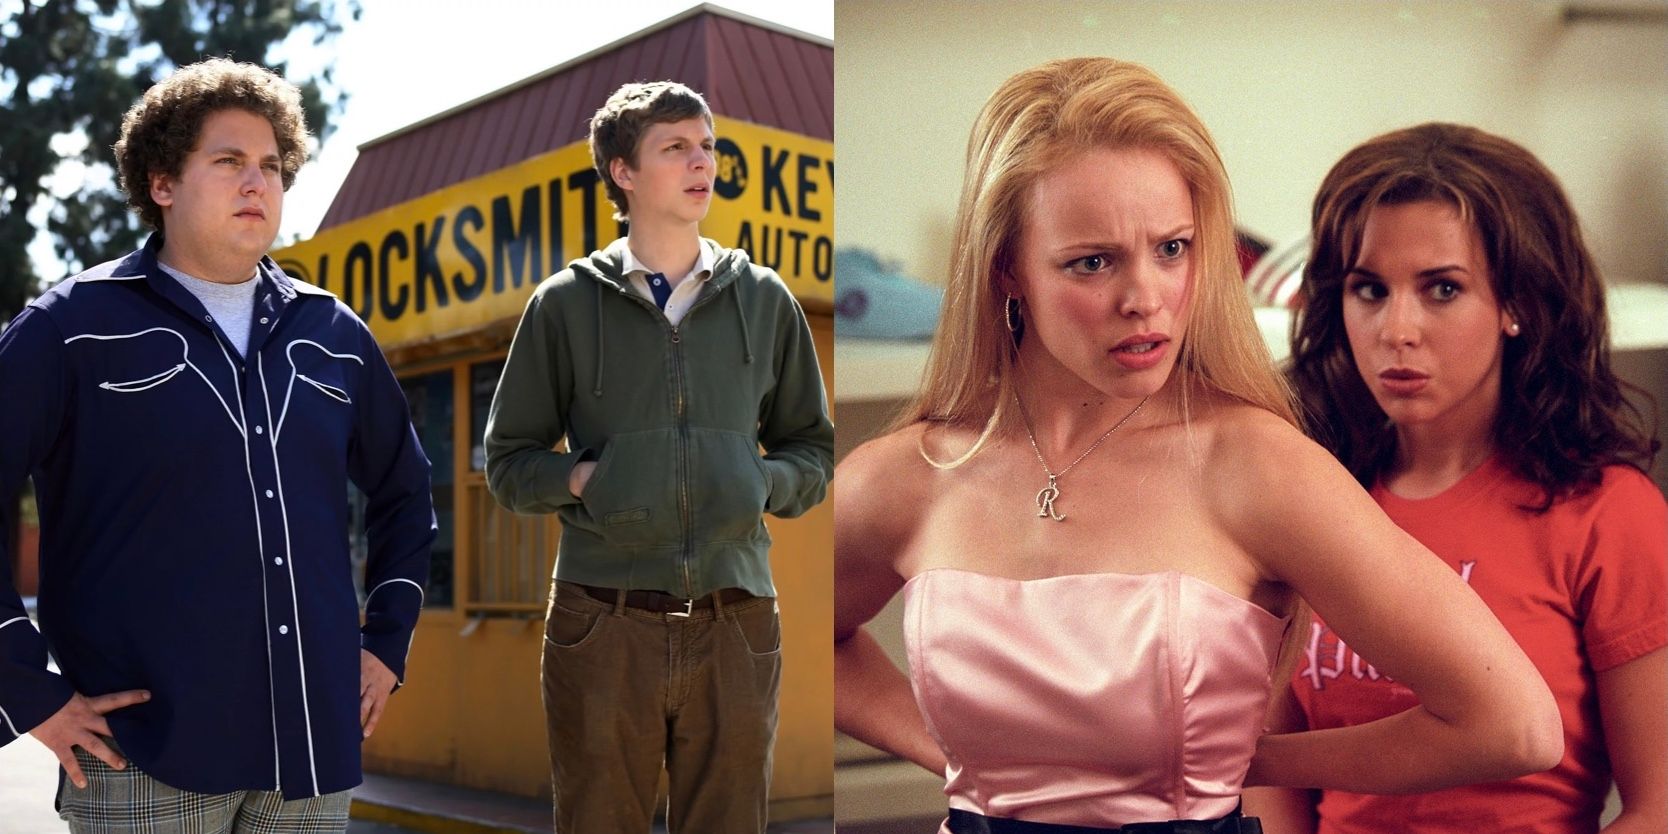 COMING OF AGE FILMS FROM THE 2000S FEATURE IMAGE - SUPERBAD & MEAN GIRLS